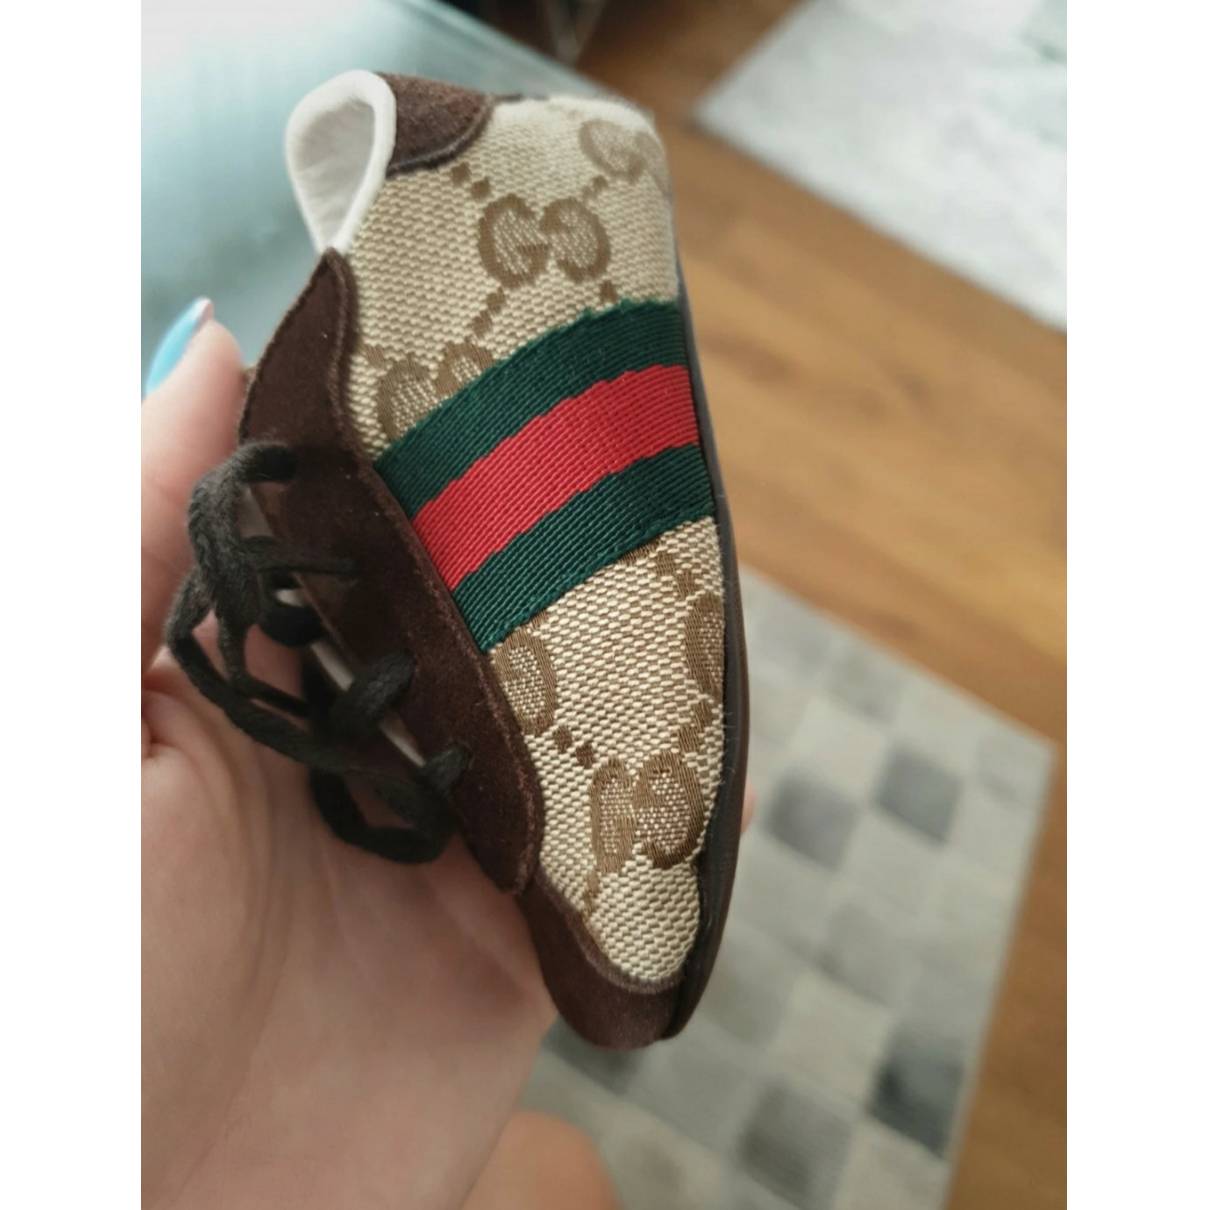 Buy Gucci Leather first shoes online